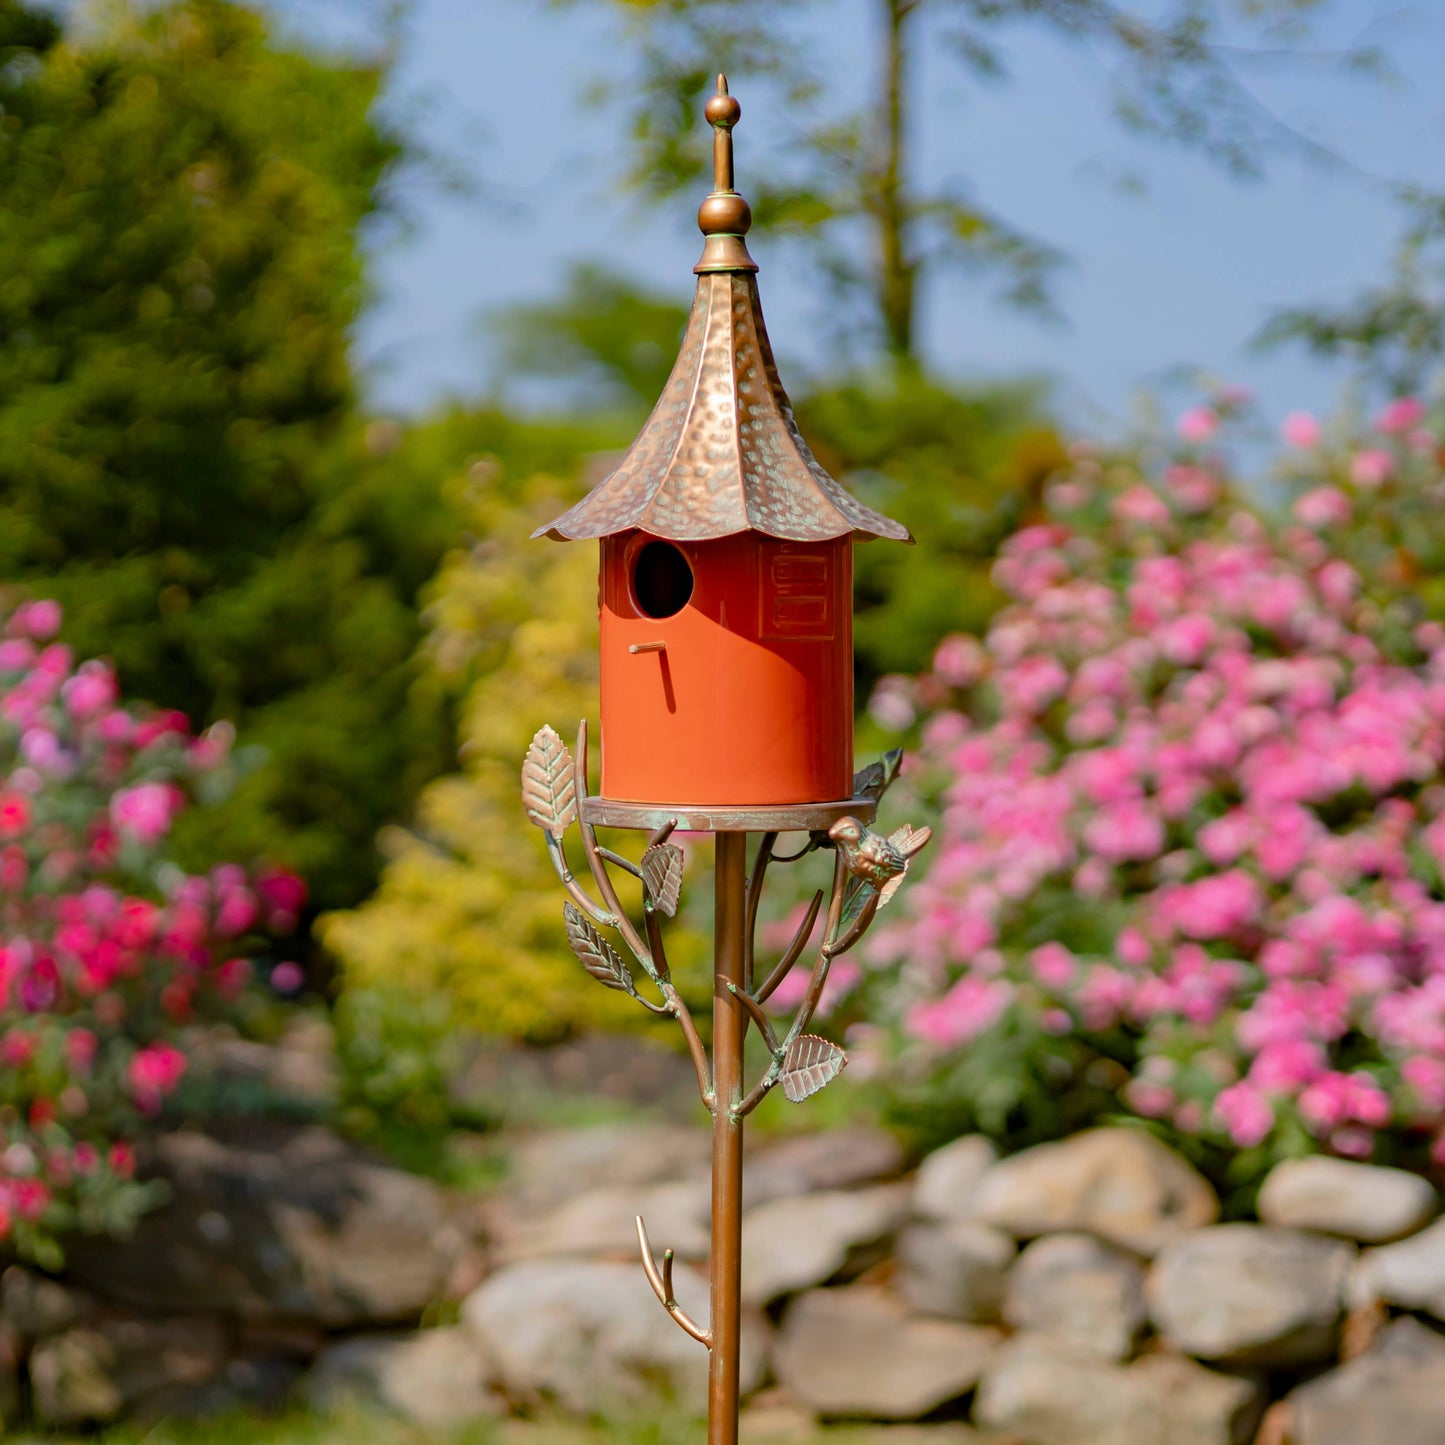 69.25" Tall Iron and Porcelain Birdhouse Stake "Amsterdam"